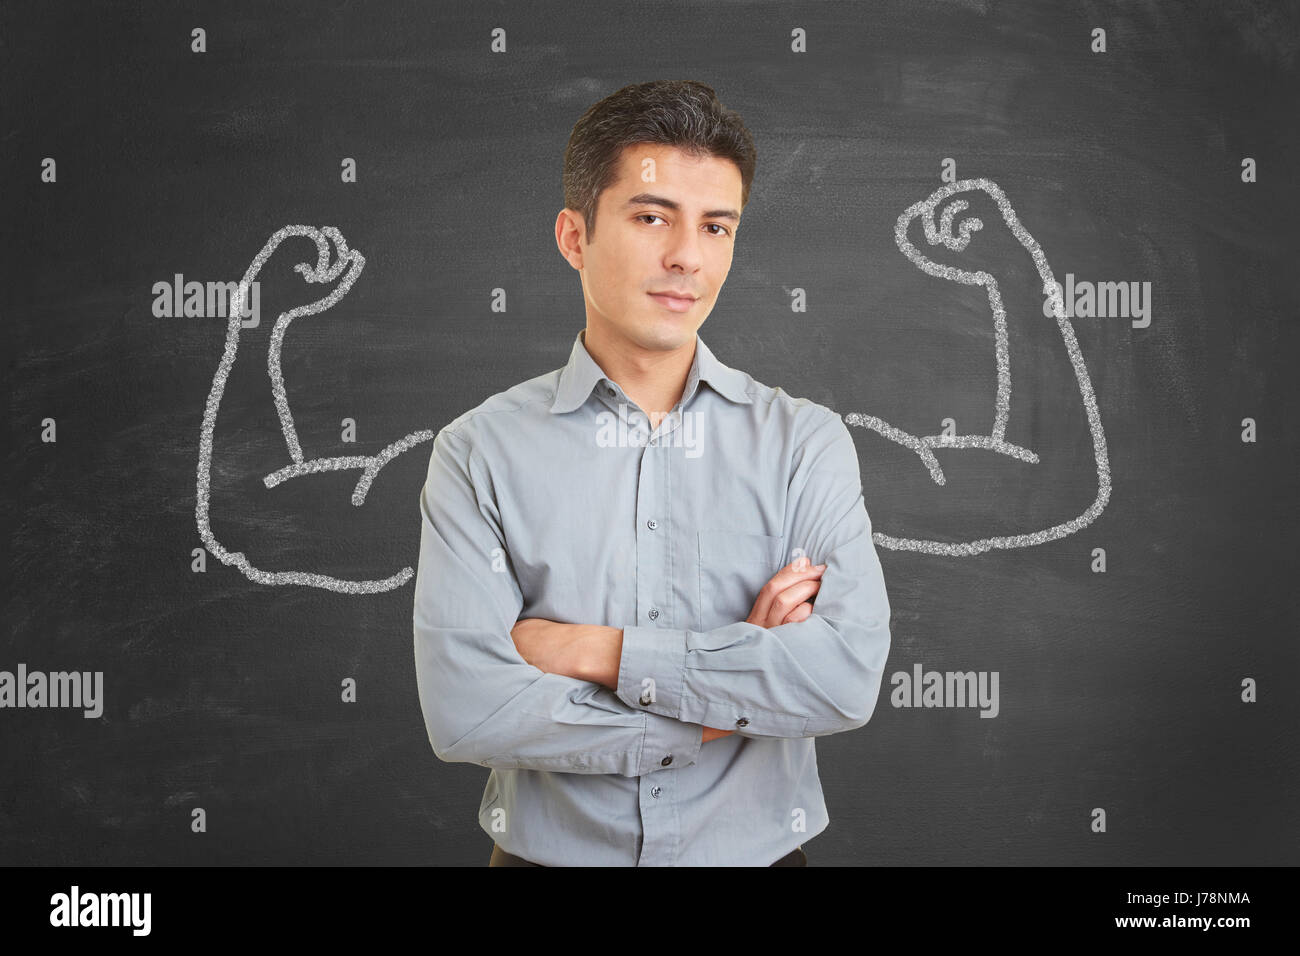 Strong and self confident businessman with chalk muscles on blackboard behind him Stock Photo